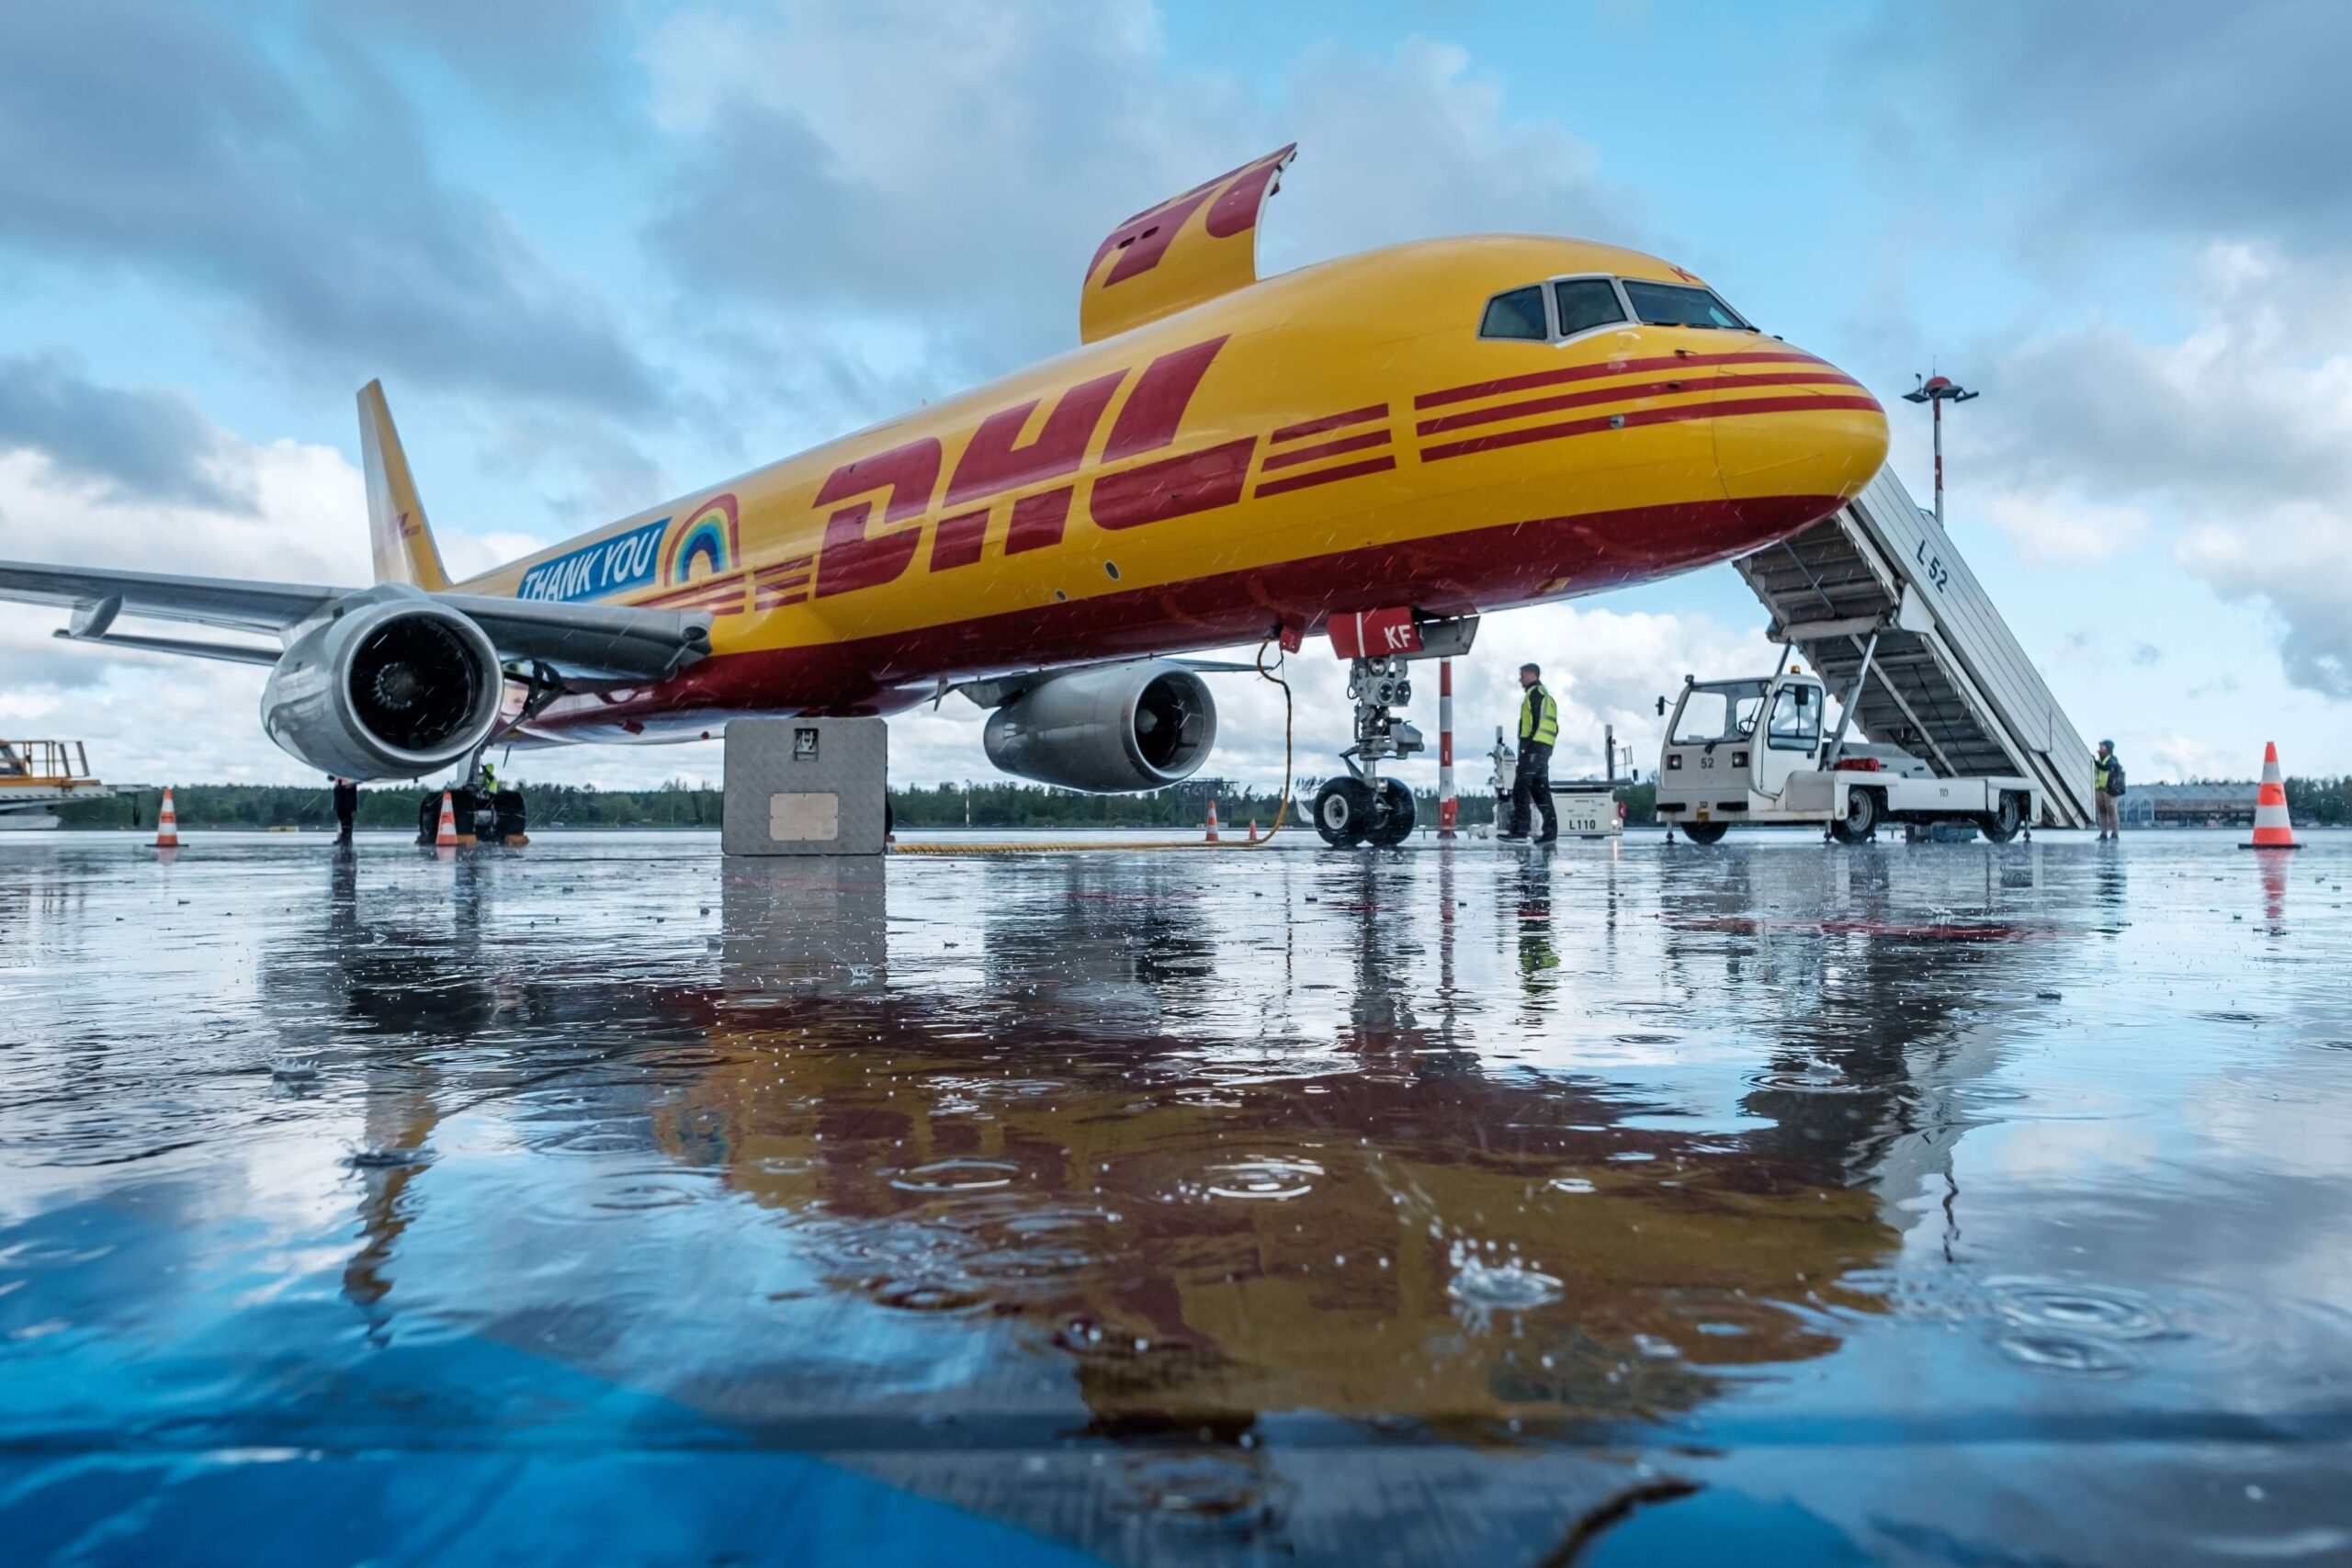 DHL to launch new European cargo airline - AeroTime